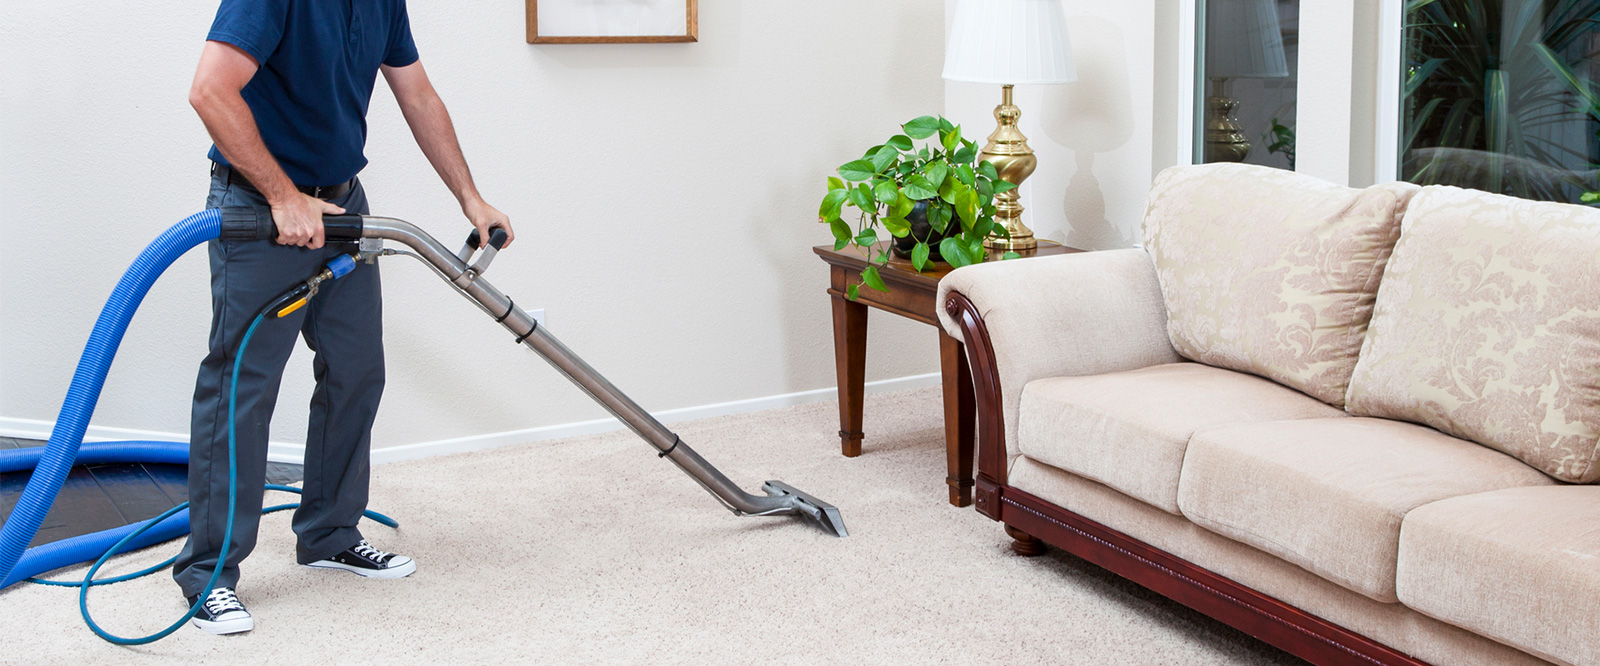 The Most Common Carpet Stains and How to Remove Them